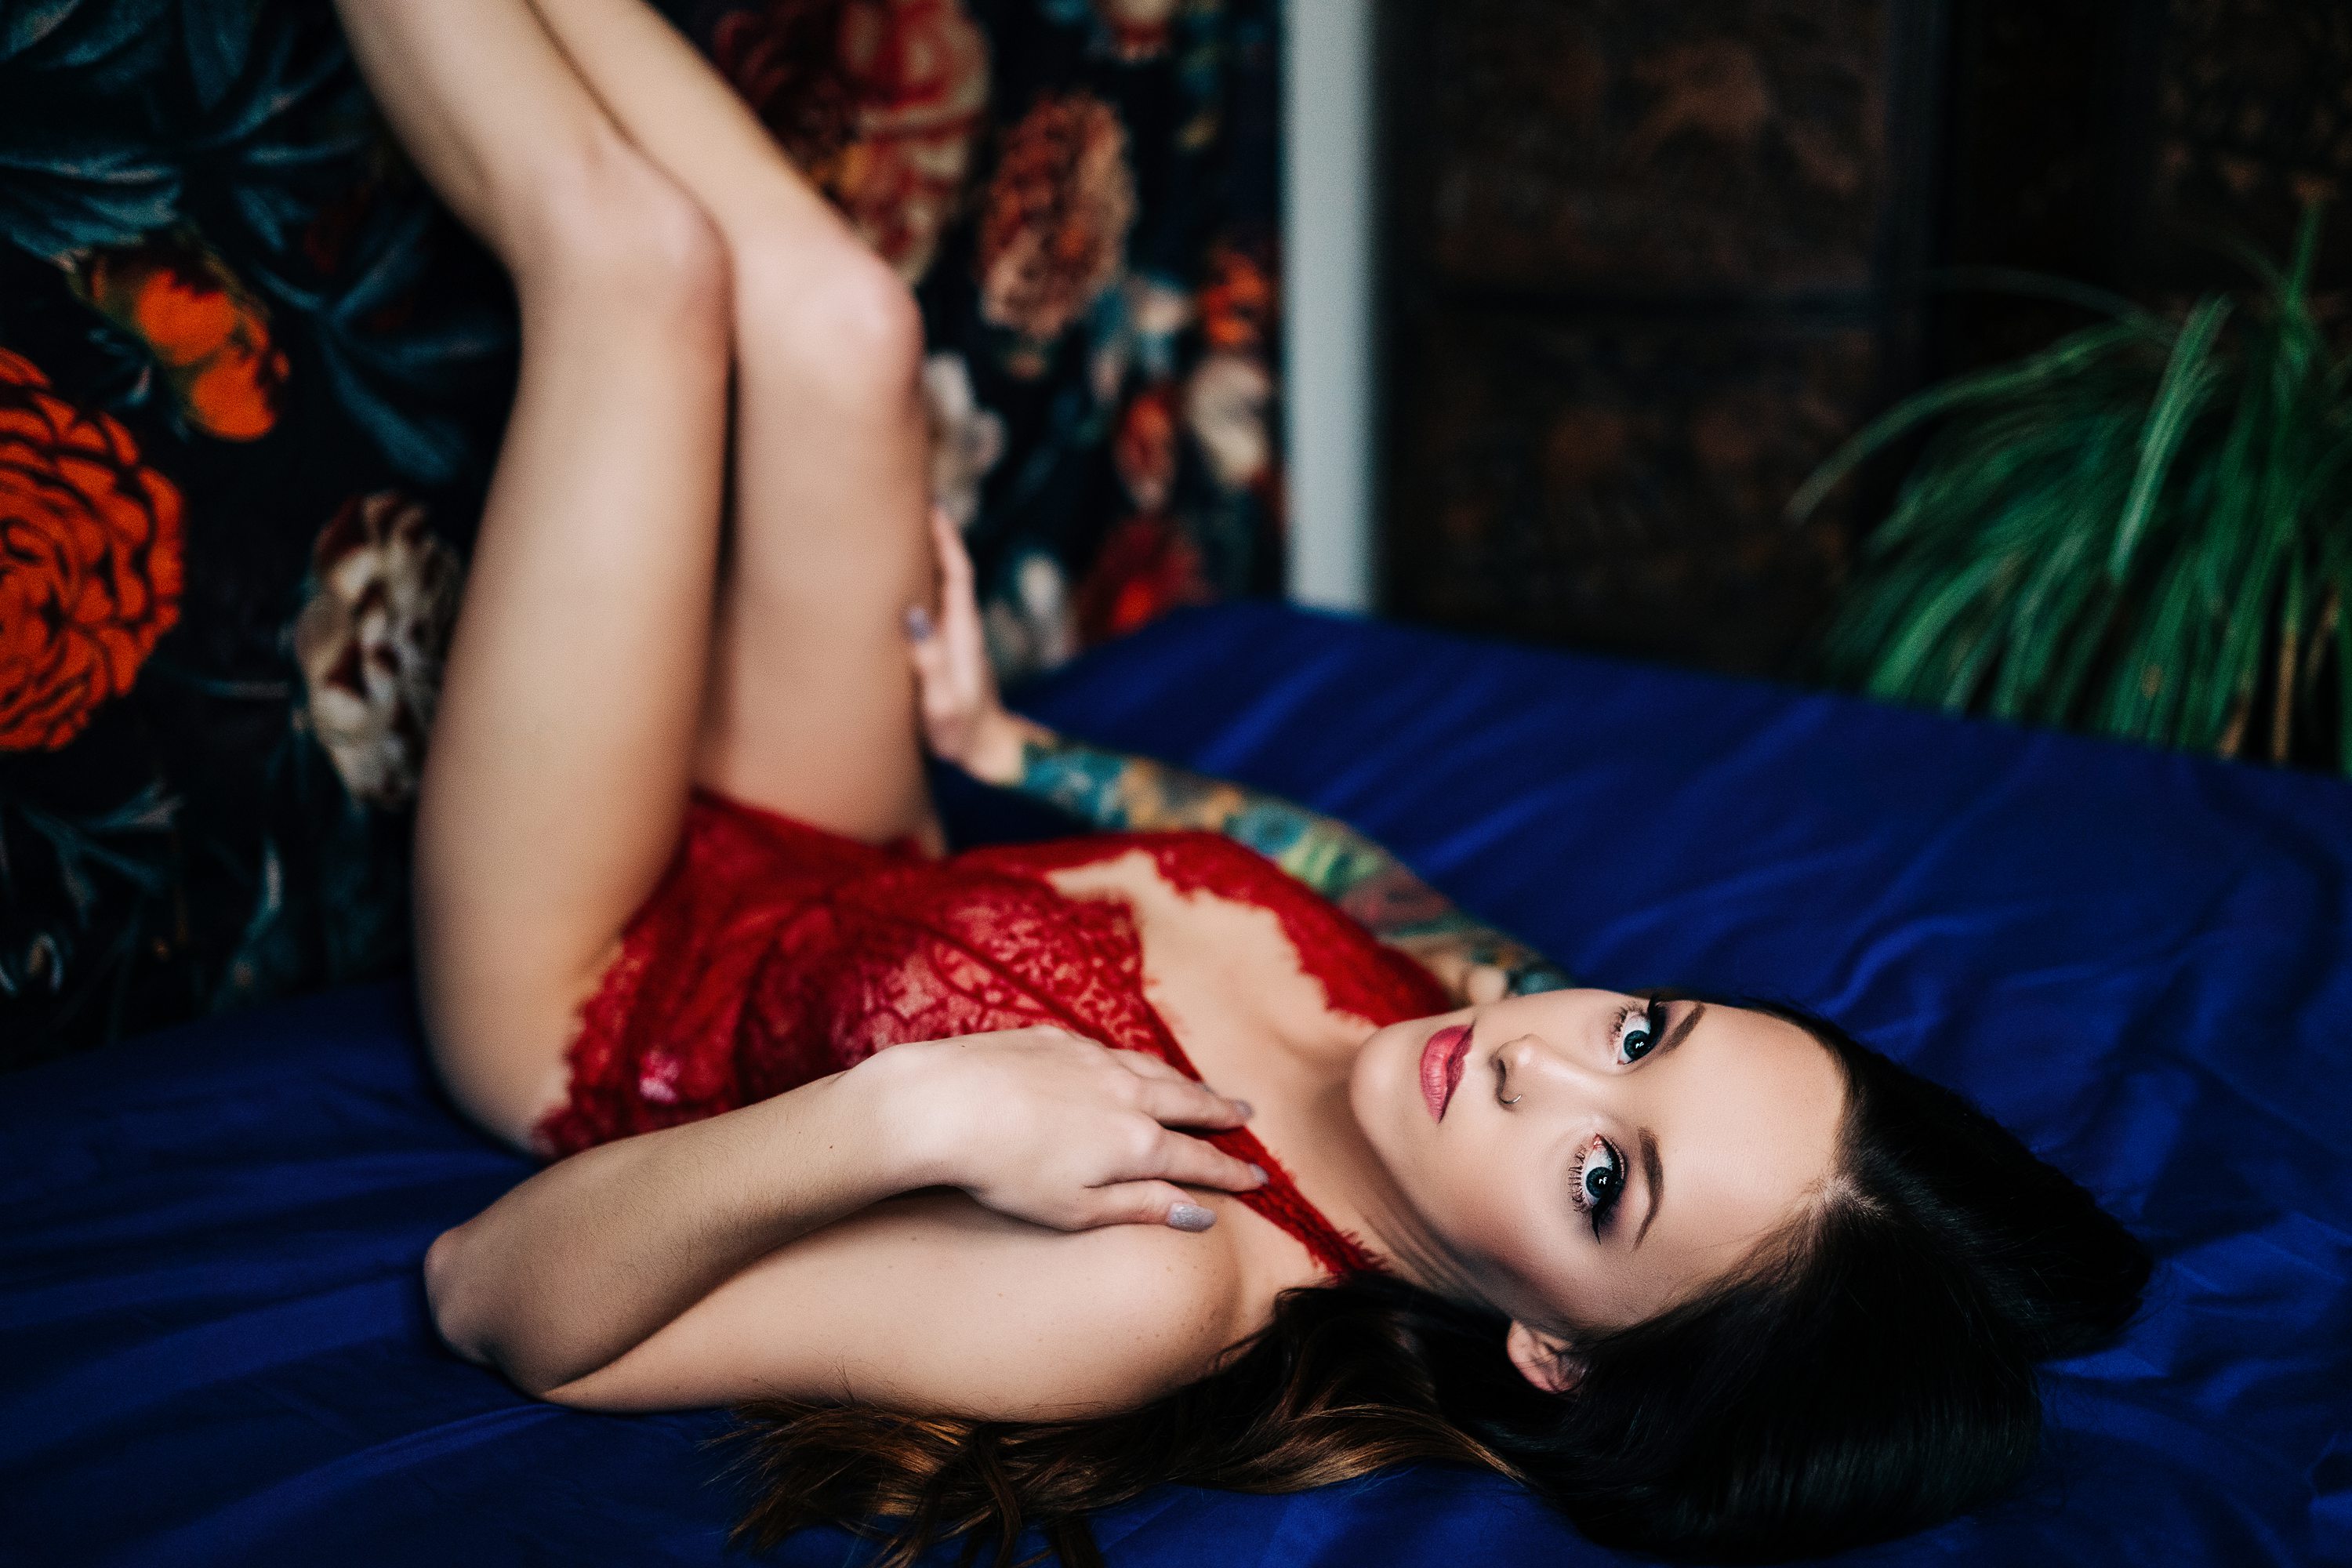 What is a Boudoir Session Anyway? Rogersville TN Boudoir Session » Jyn Allen Boudoir Kingsport TN Boudoir Photography pic